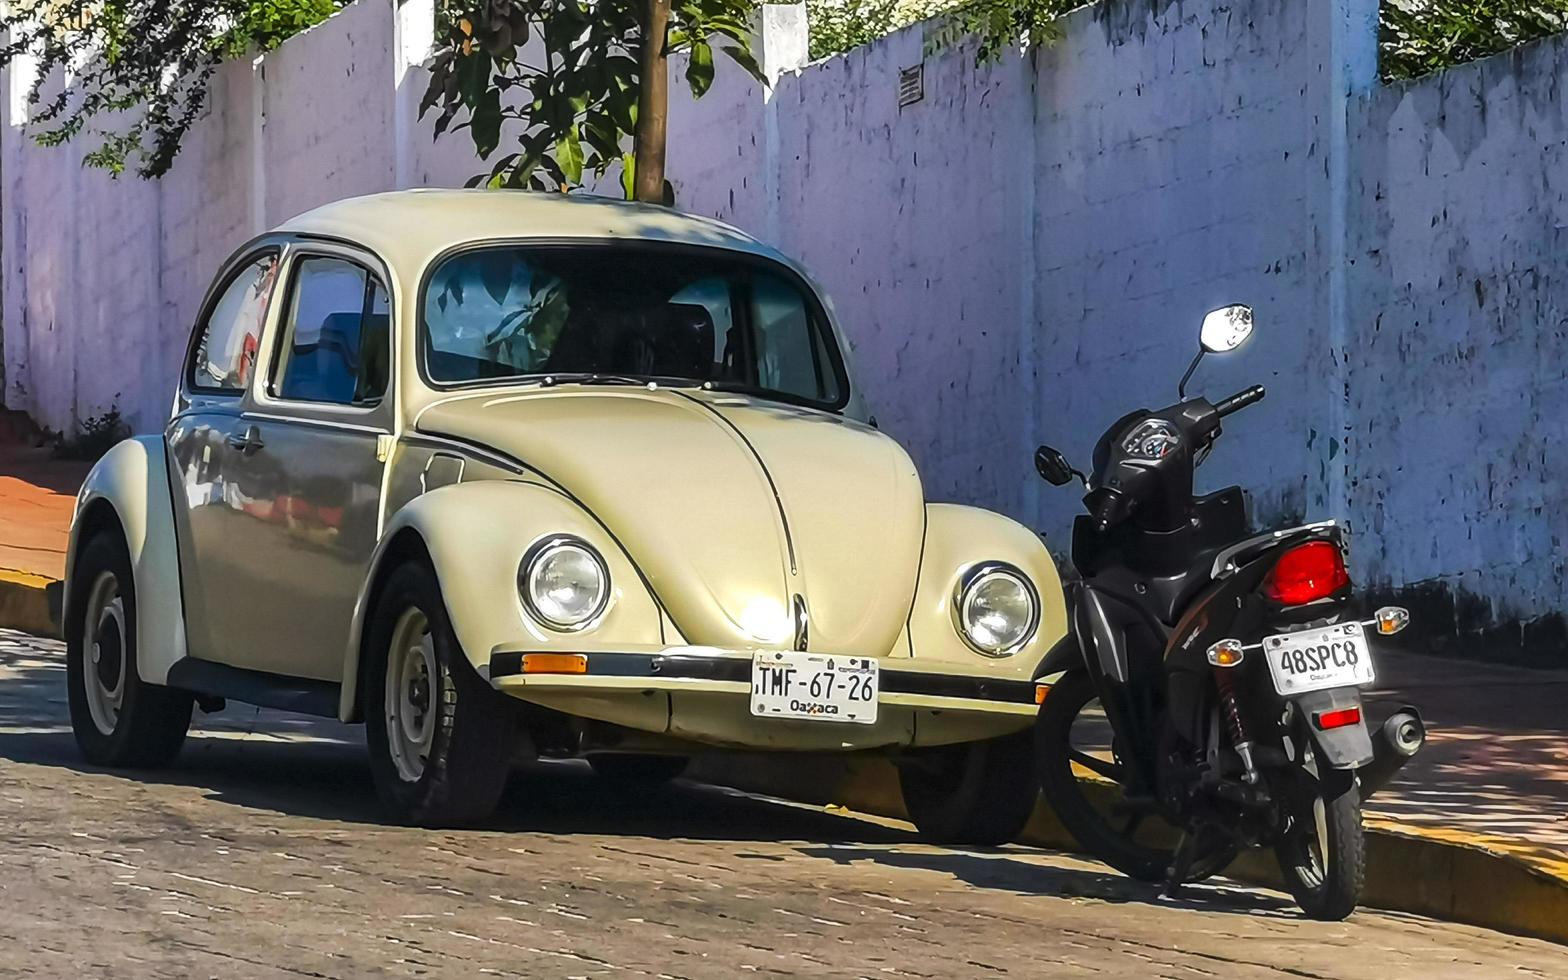 Puerto Escondido Oaxaca Mexico 2022 Various colorful tuned cars and classic vintage cars  Mexico. photo